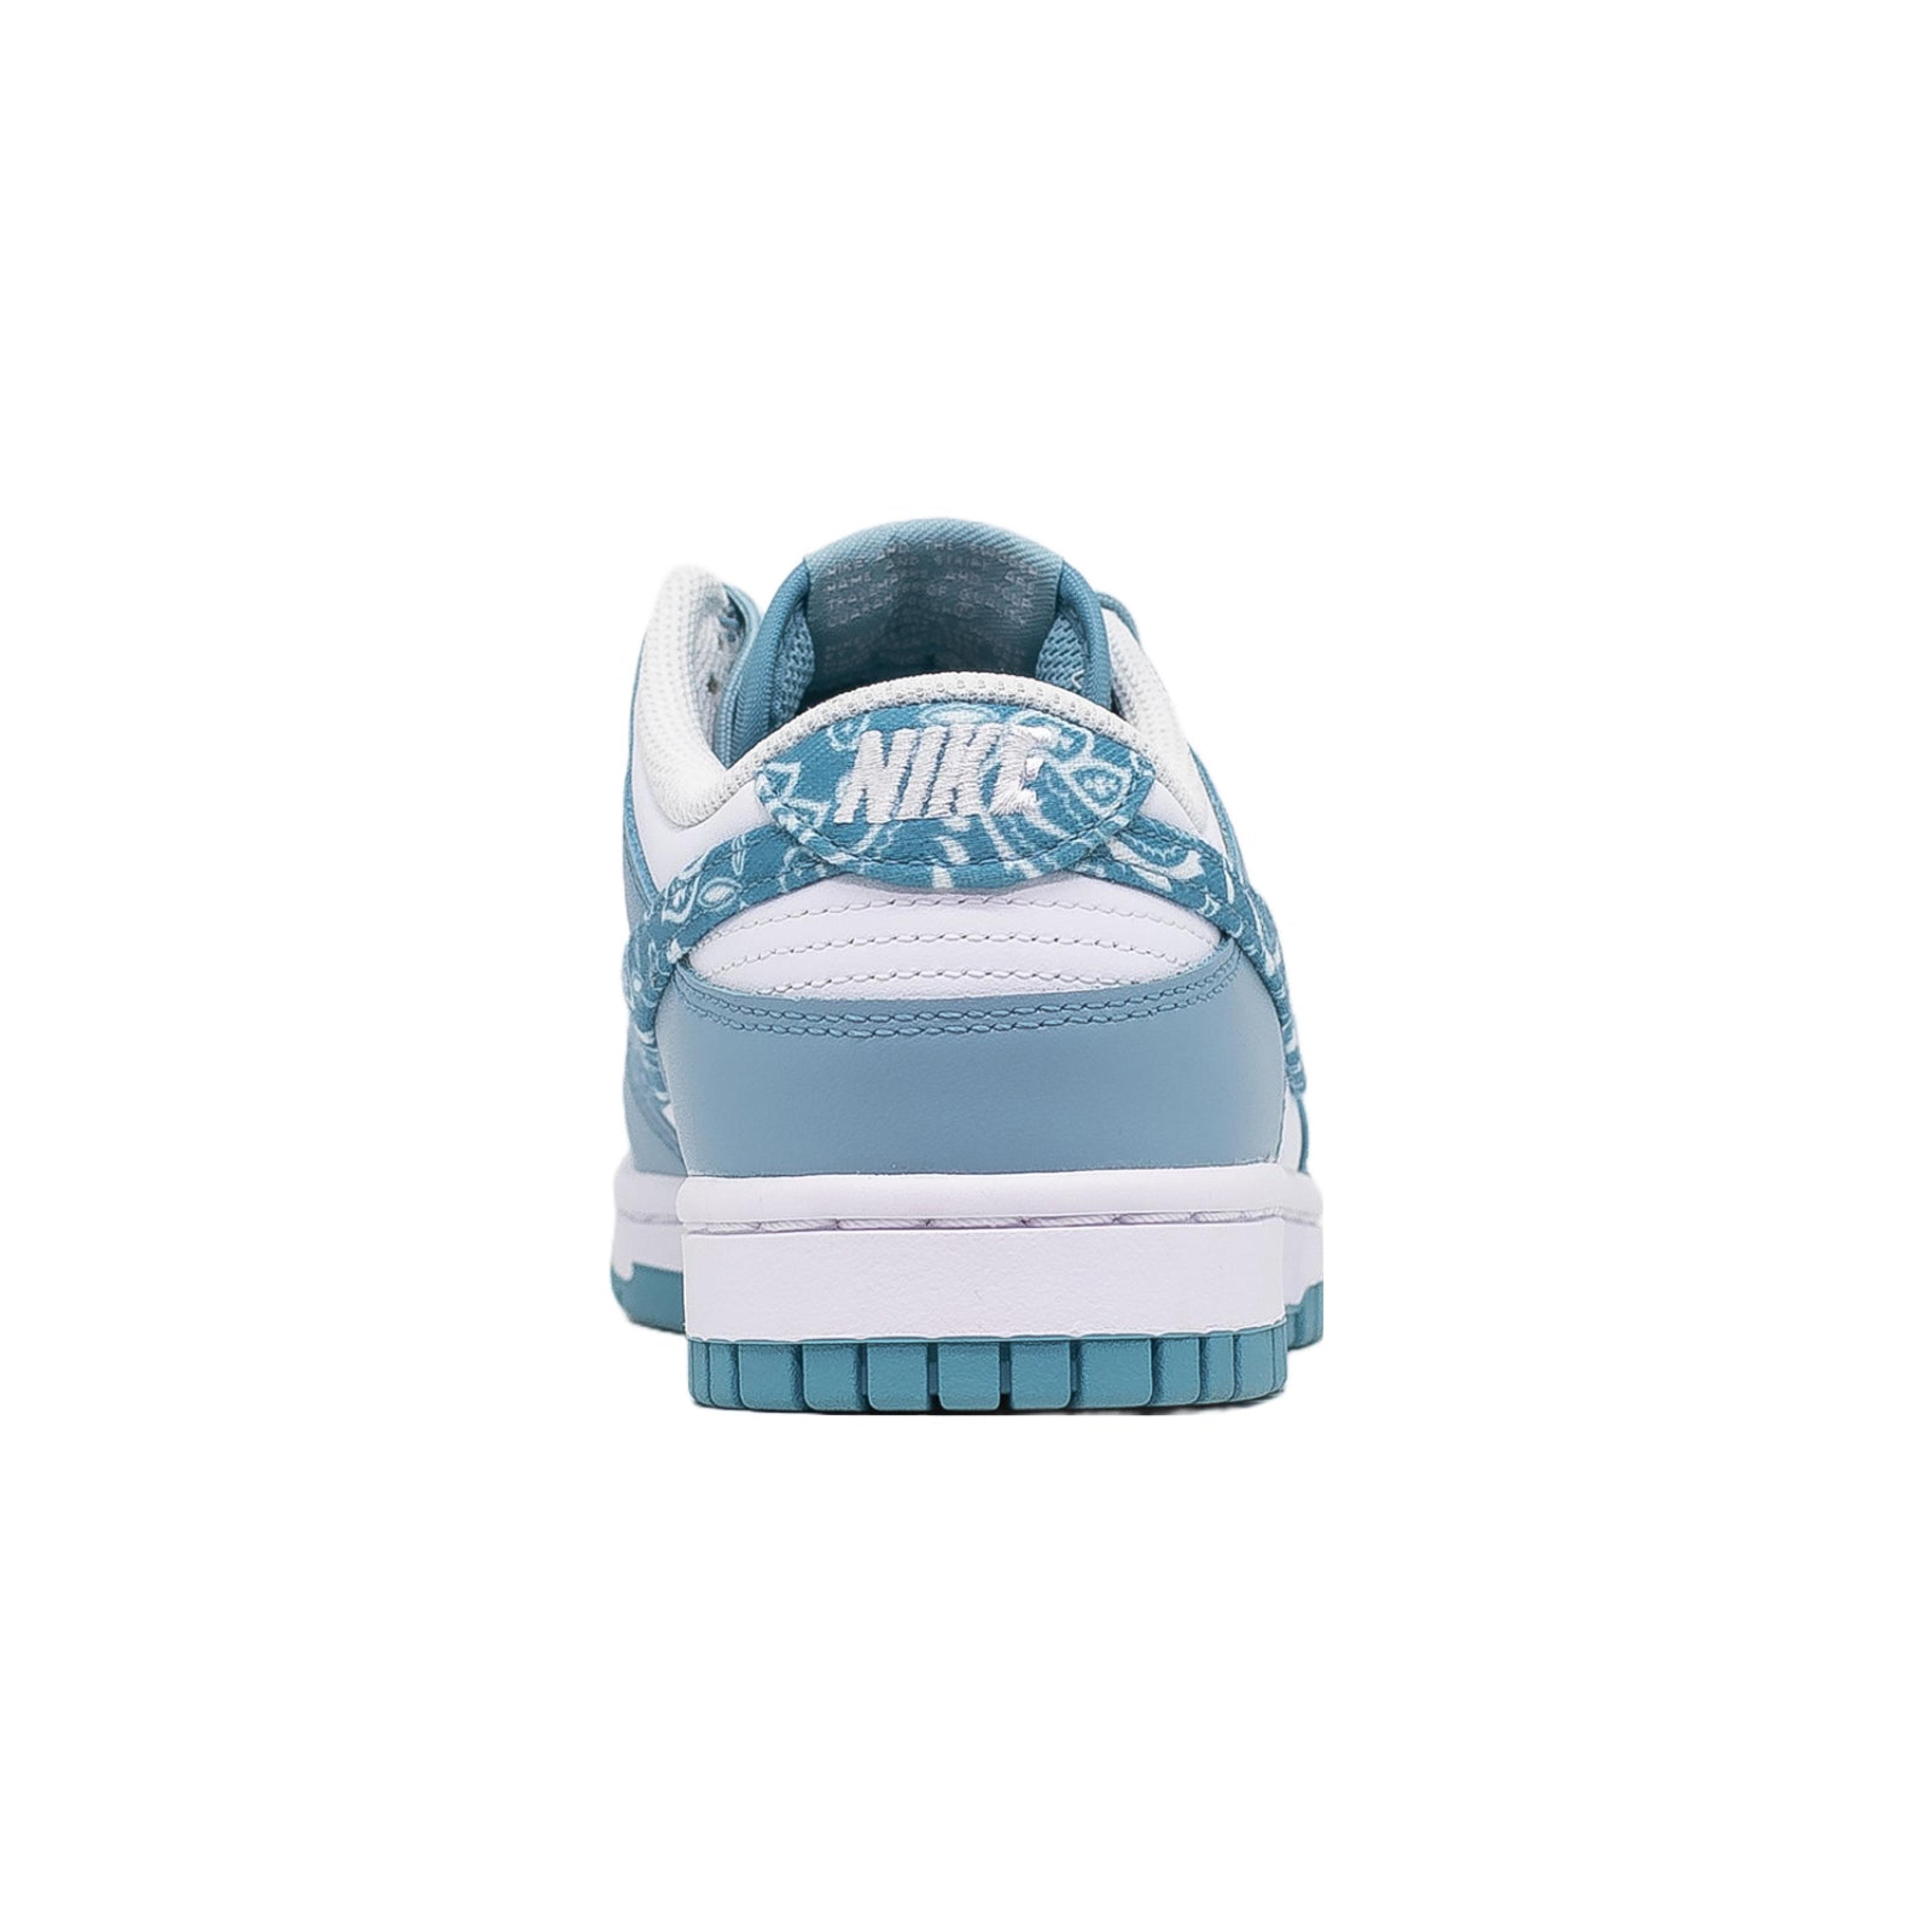 Alternate View 3 of Women's Nike Dunk Low, Blue Paisley